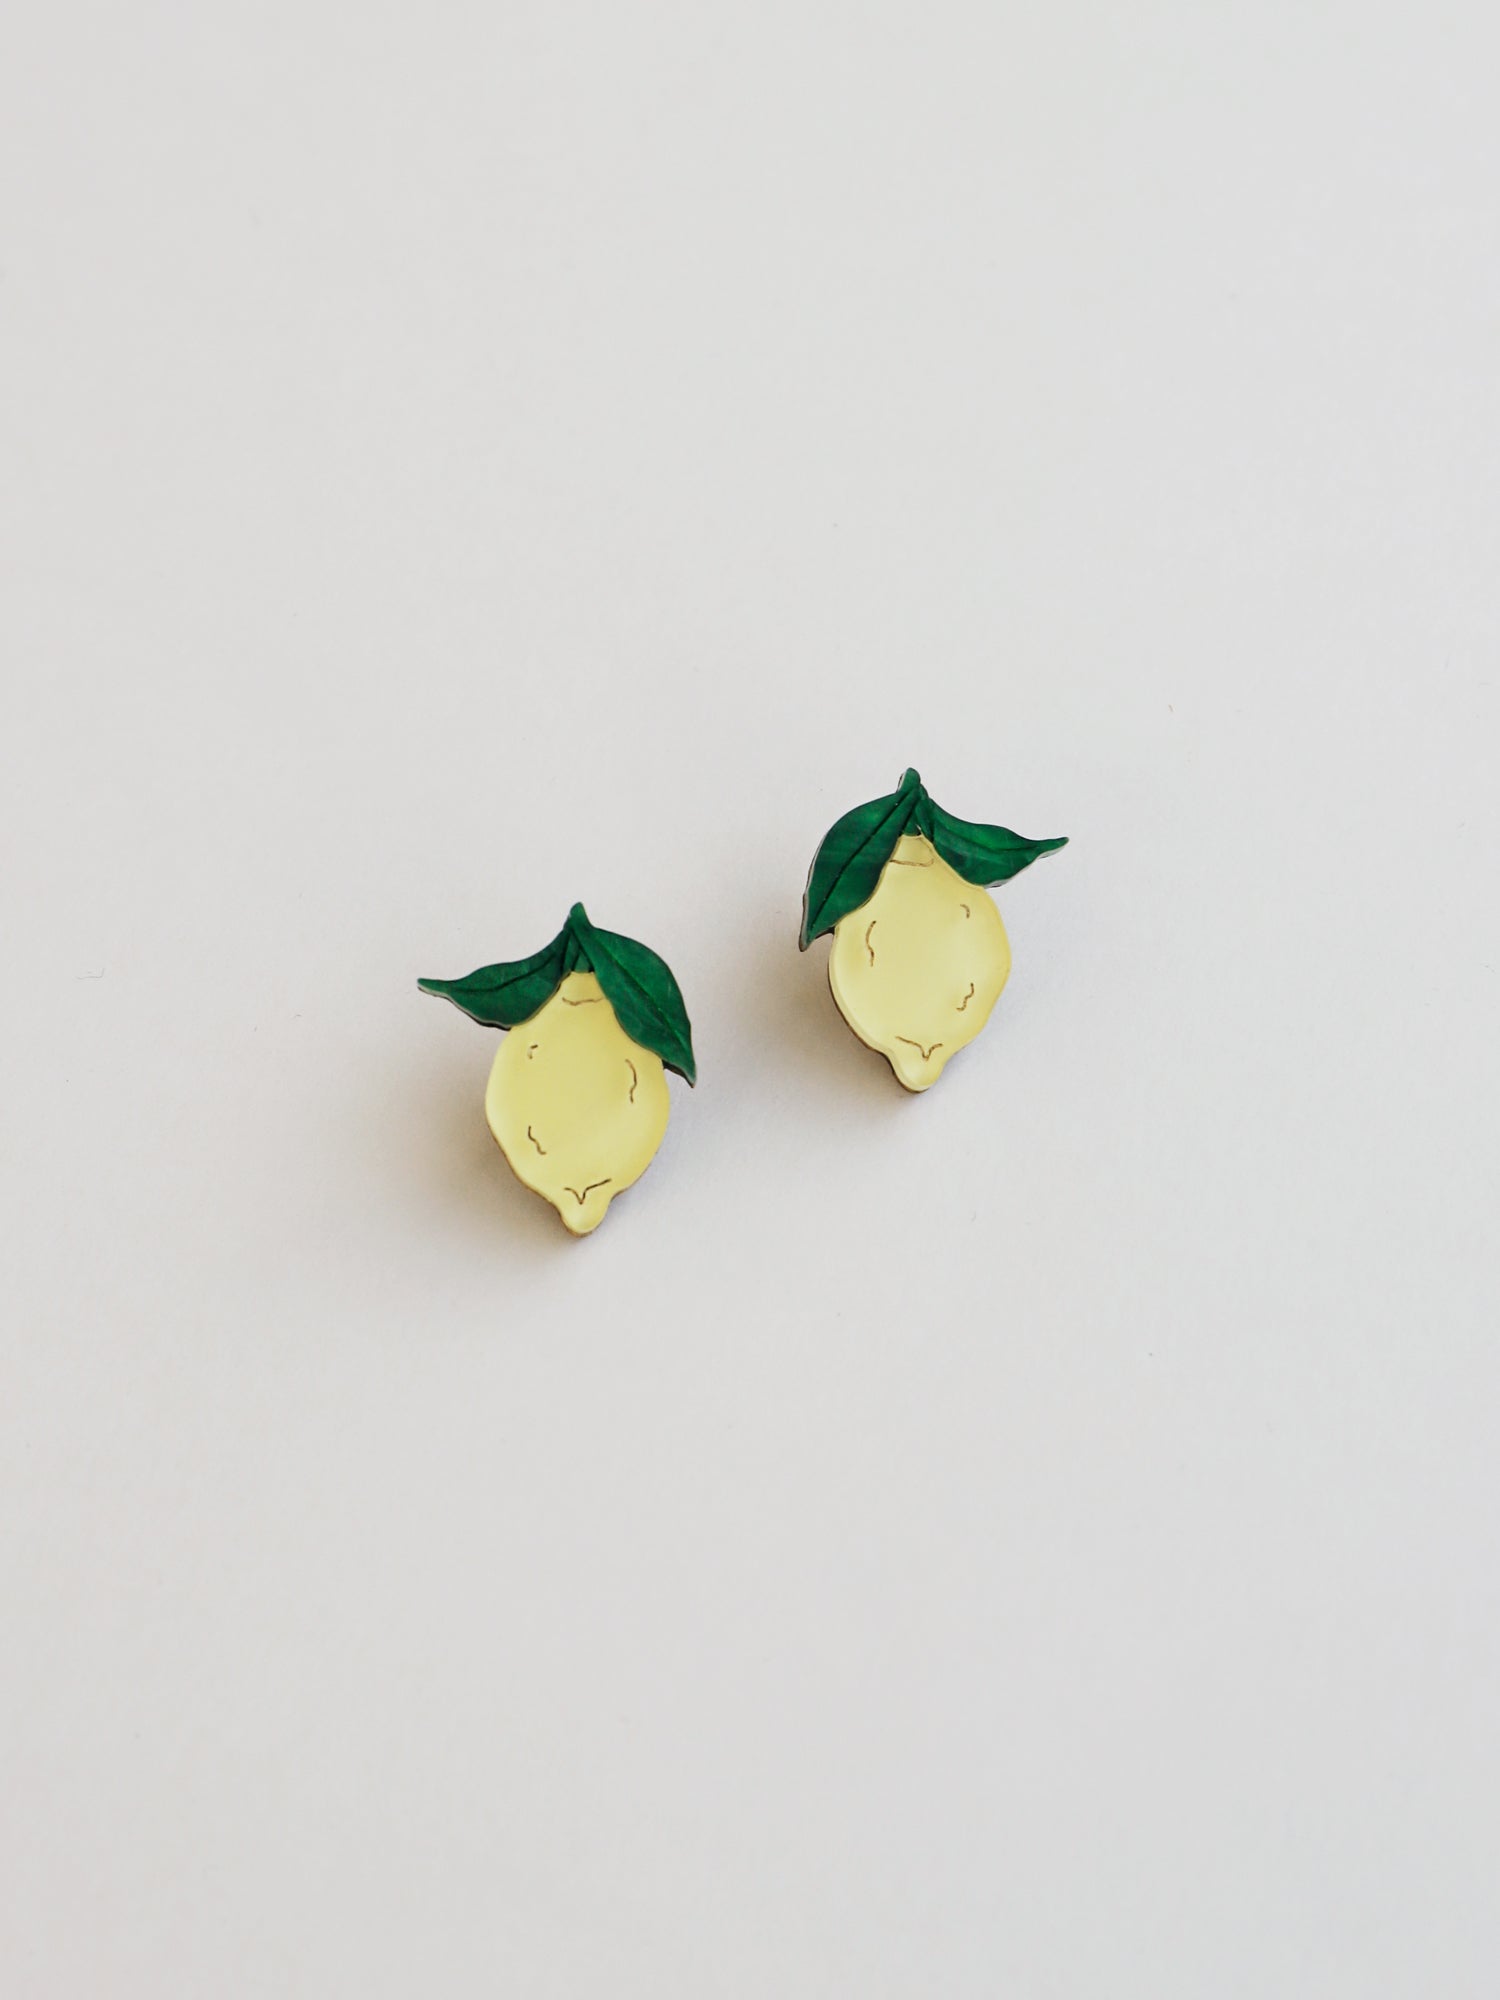 Lemon studs made with wood, 64% recycled acrylic and hand-inked details with sterling silver earring posts & butterflies. Handmade in the UK at Wolf & Moon.